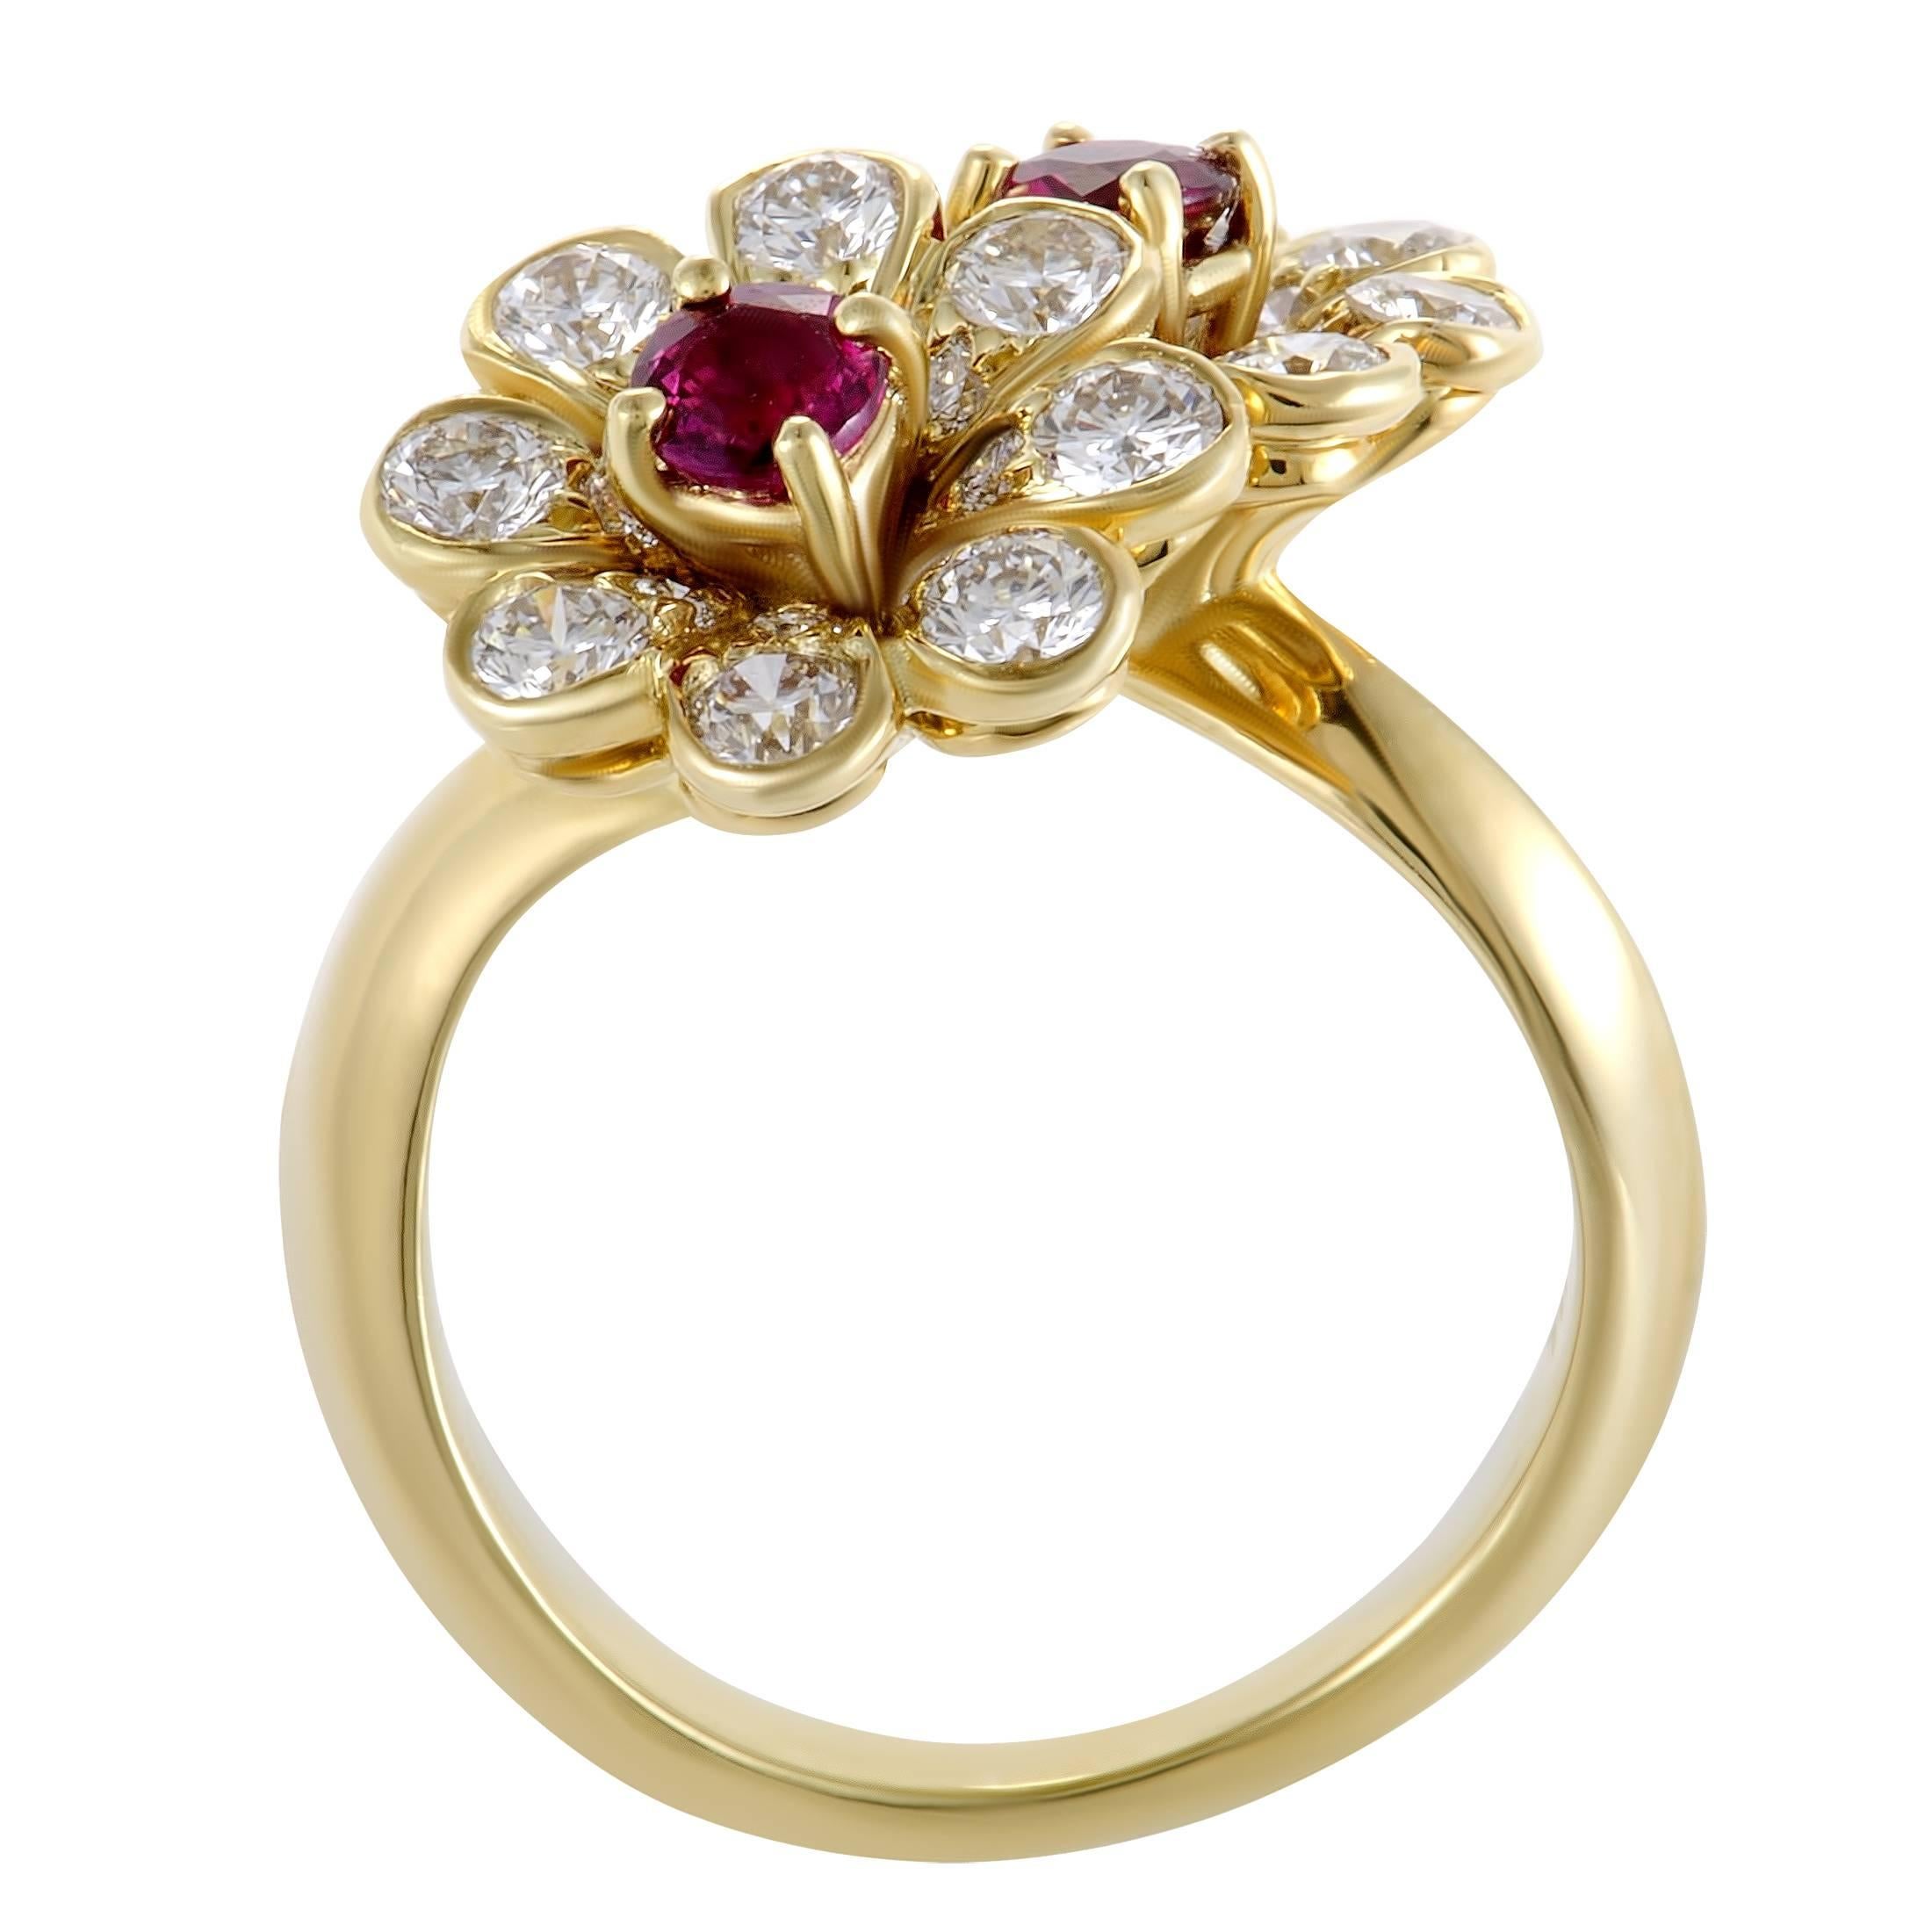 The classy luxurious materials and the lovely floral design produce a gorgeous feminine effect in this sublime ring presented by Tiffany & Co. that is made of alluring 18K yellow gold and decorated with 0.17 carats of nifty rubies and 0.55 carats of